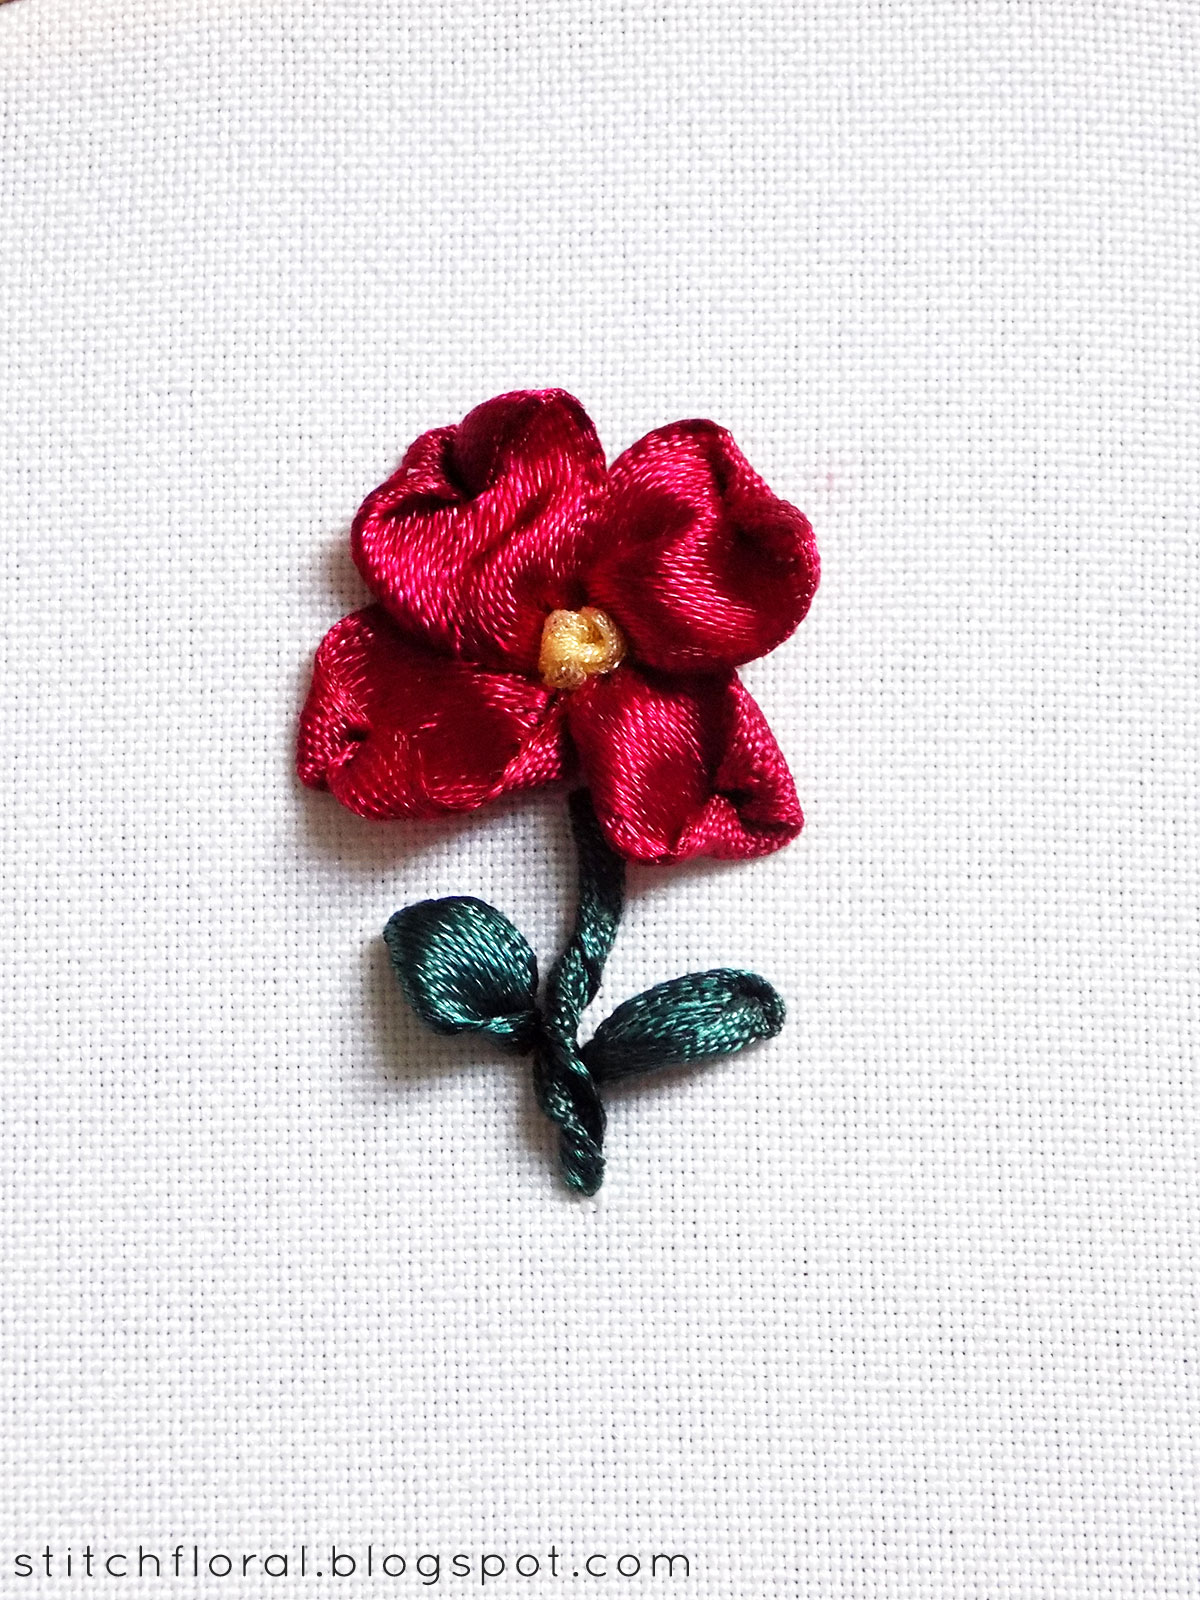 10 Ribbon Embroidery Flowers with silk/satin ribbons (Tutorials